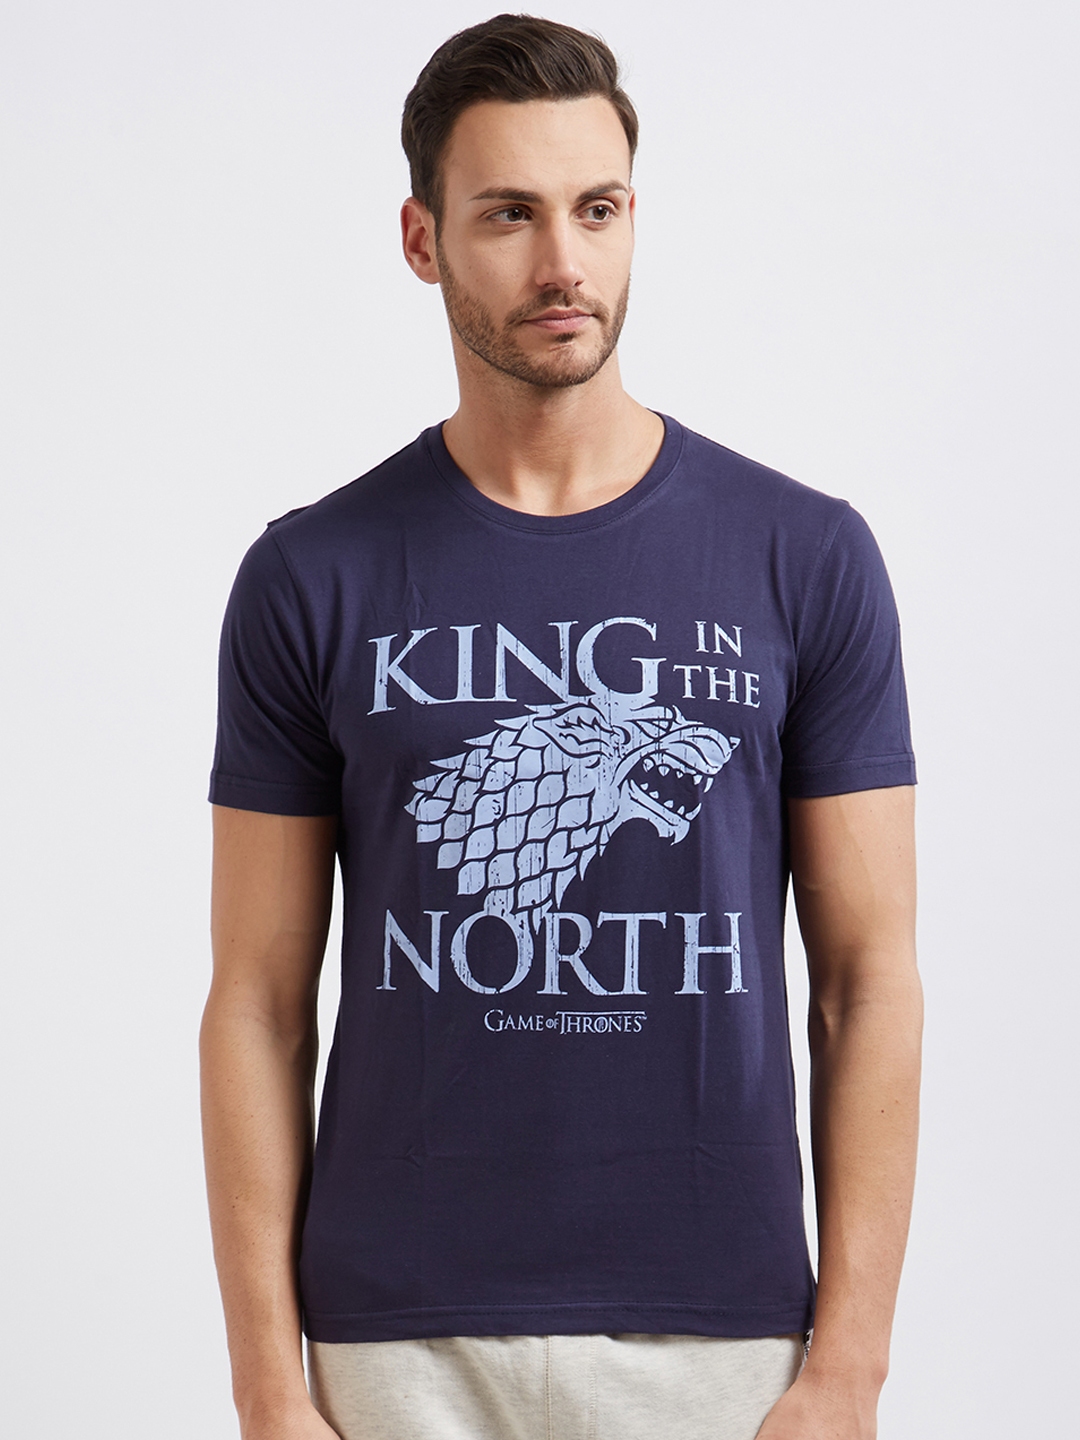 king in the north t shirt